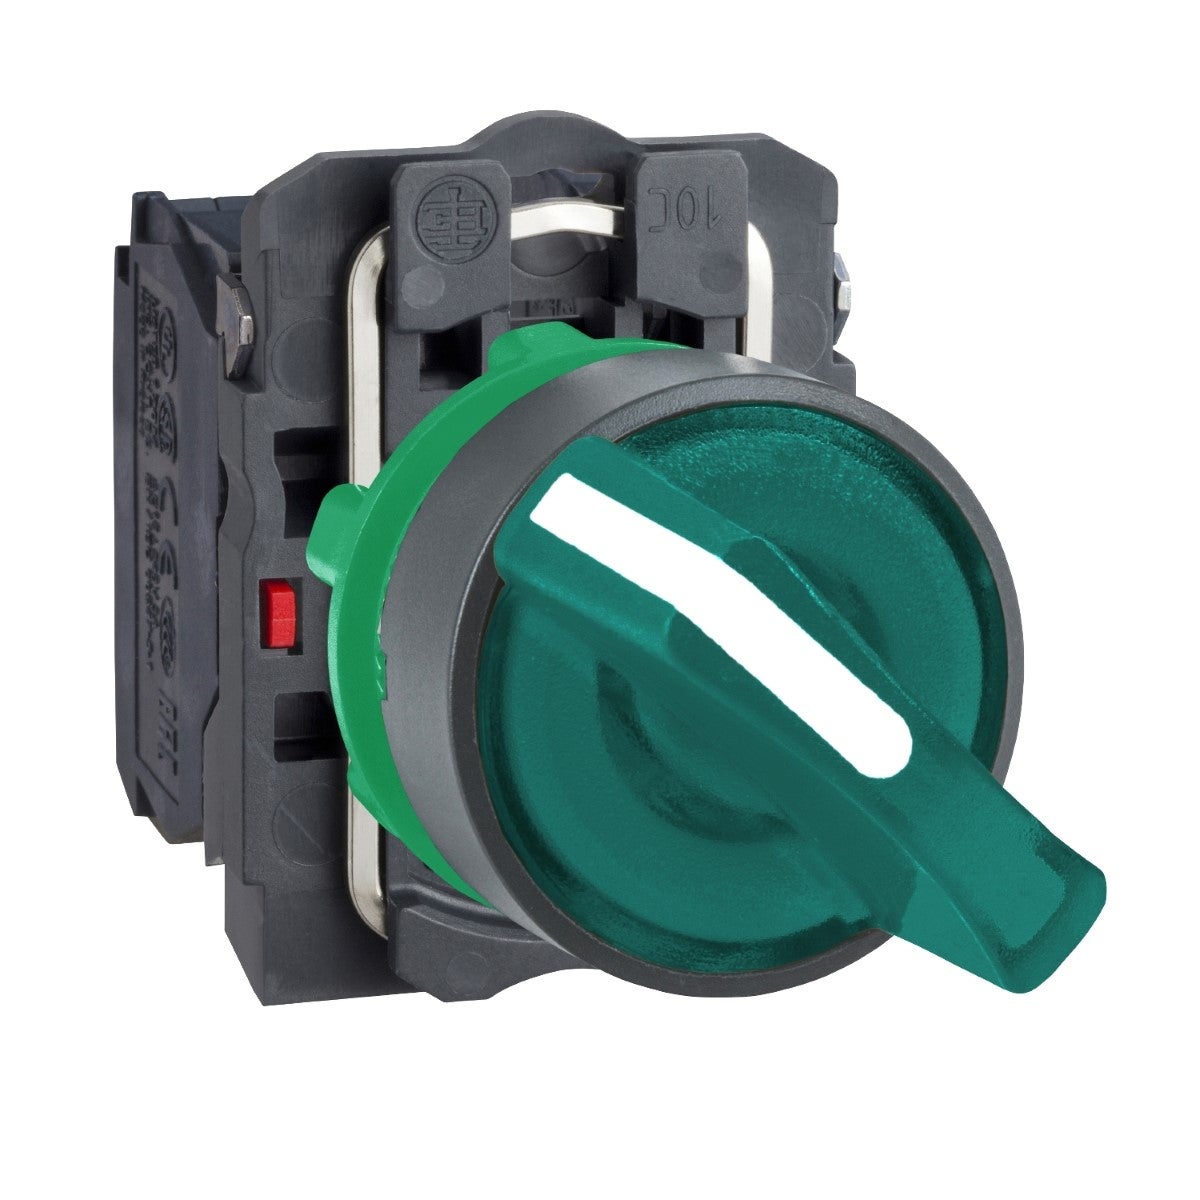 Illuminated selector switch, plastic, green, Ã˜22, 2 positions, stay put, 230...240 V AC, 1 NO + 1 NC